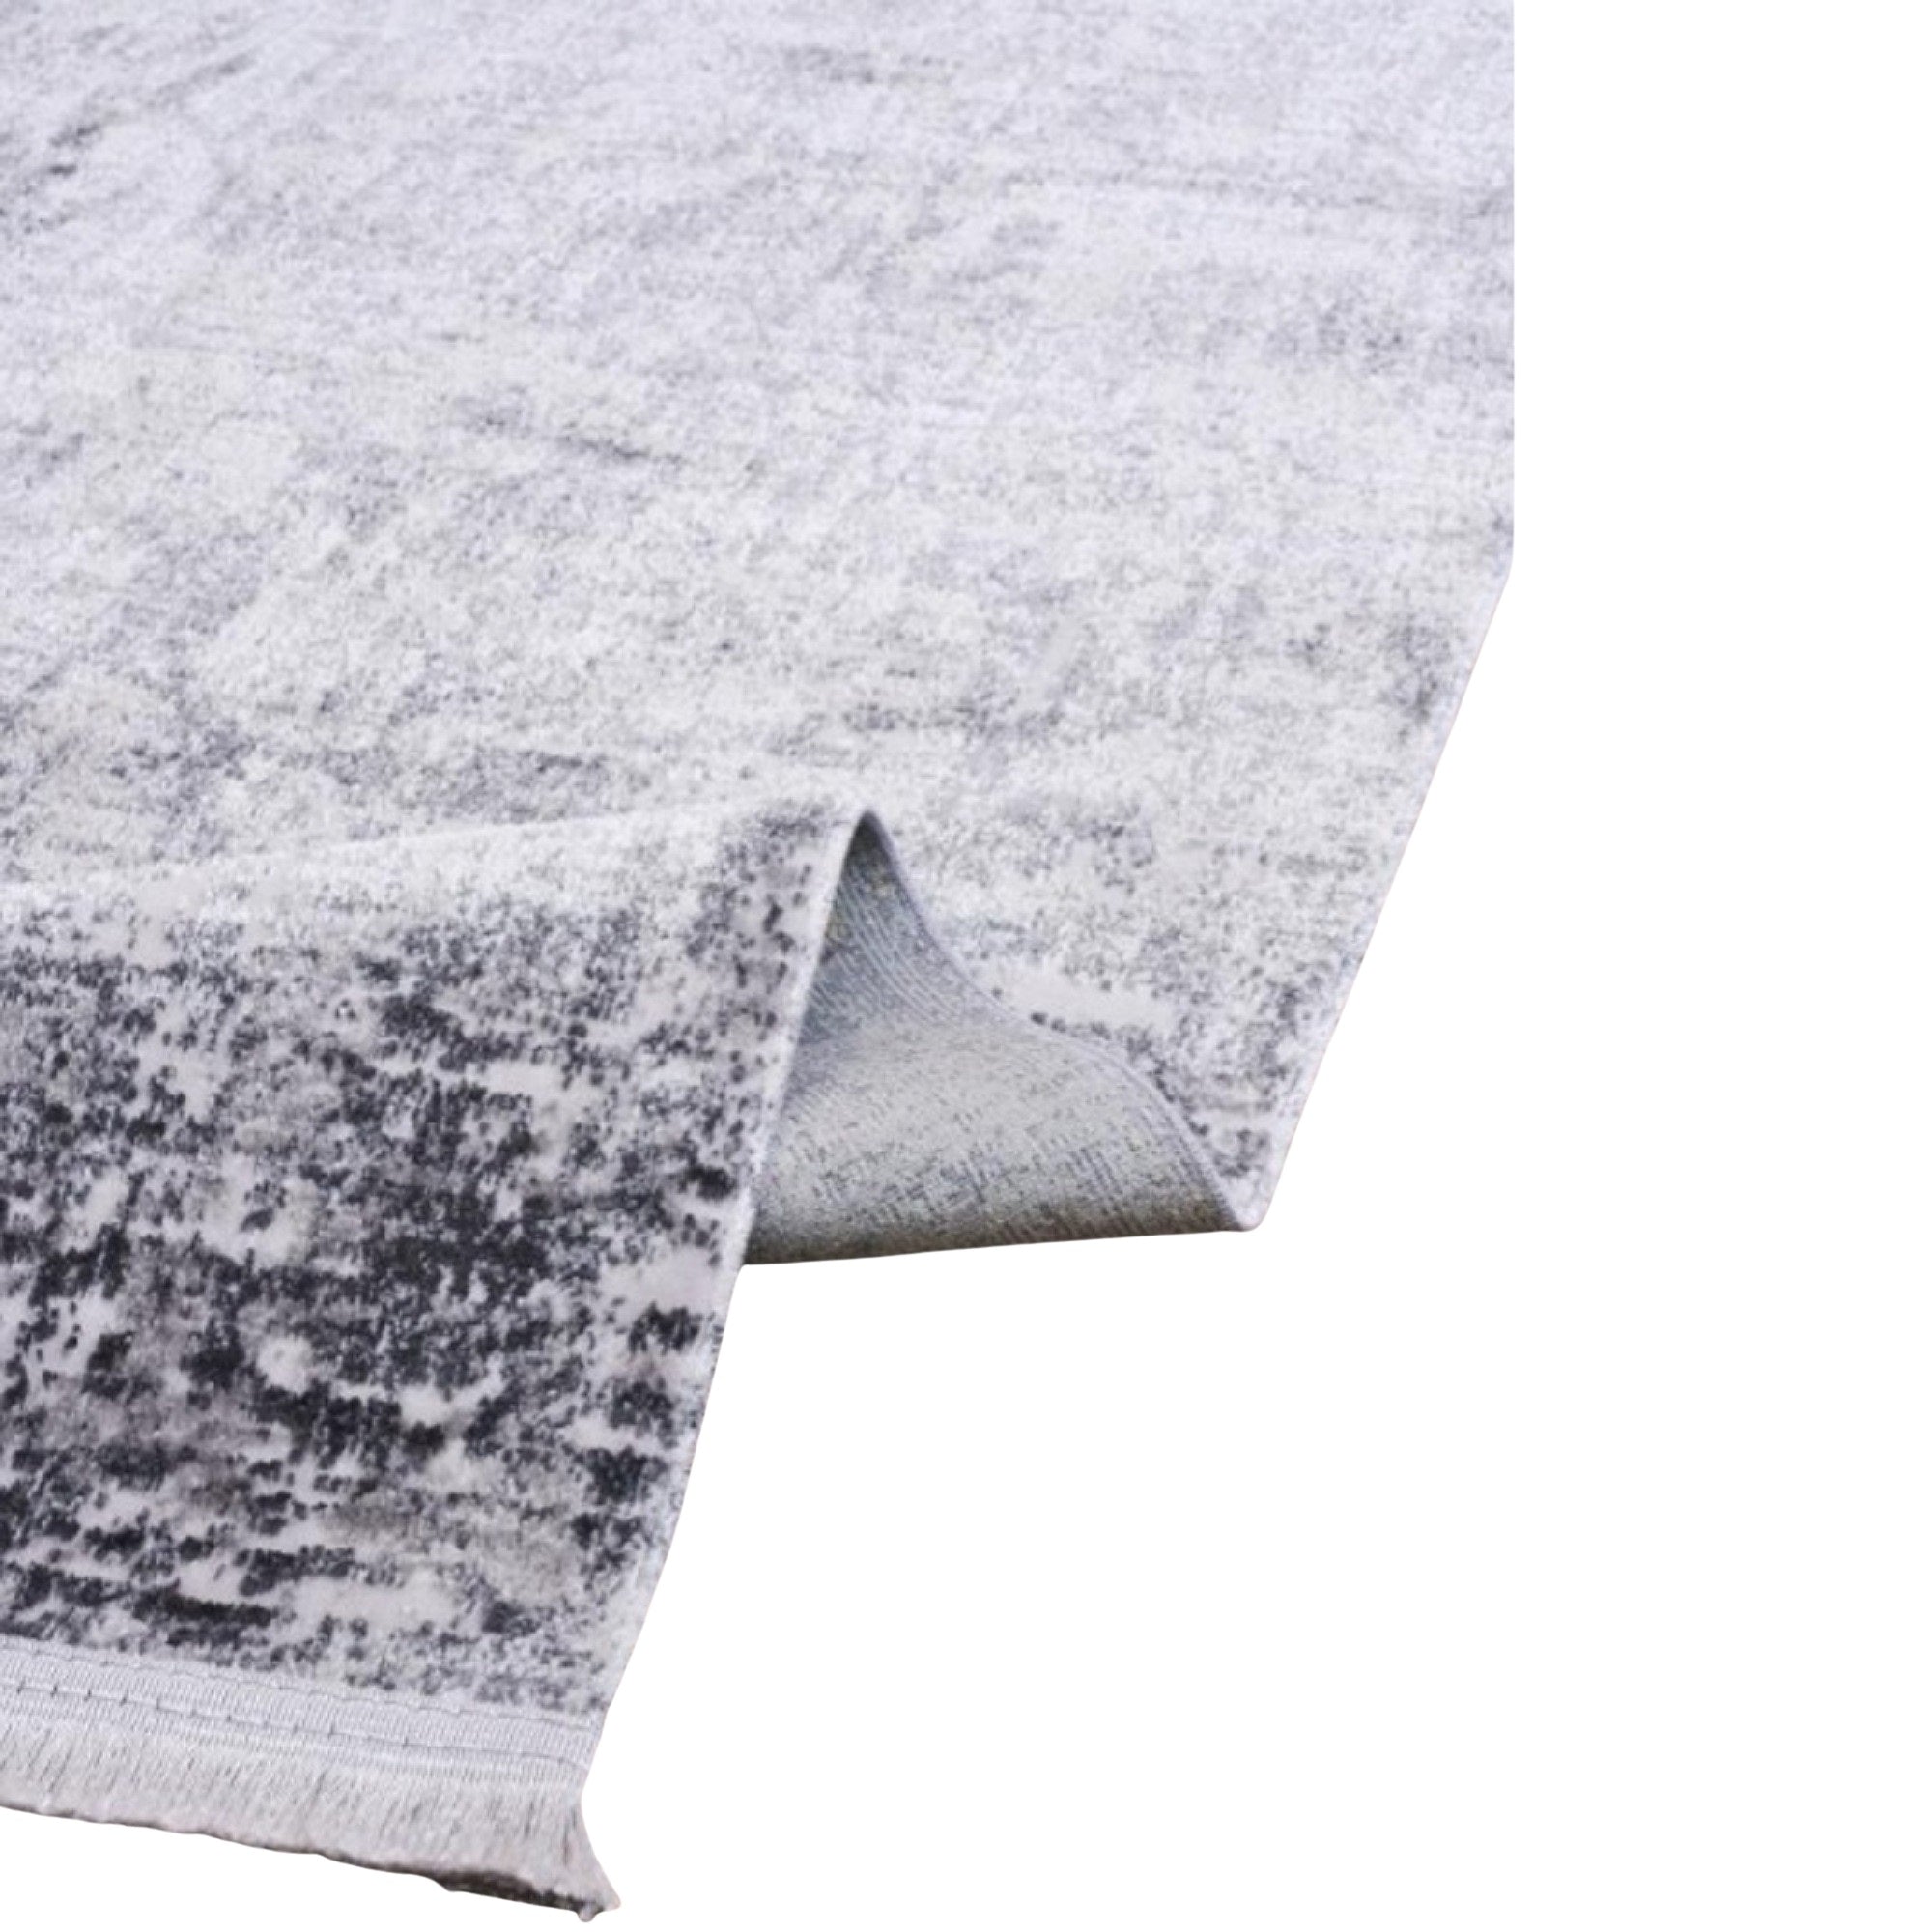 Lucca Silver Grey Fringed Rug